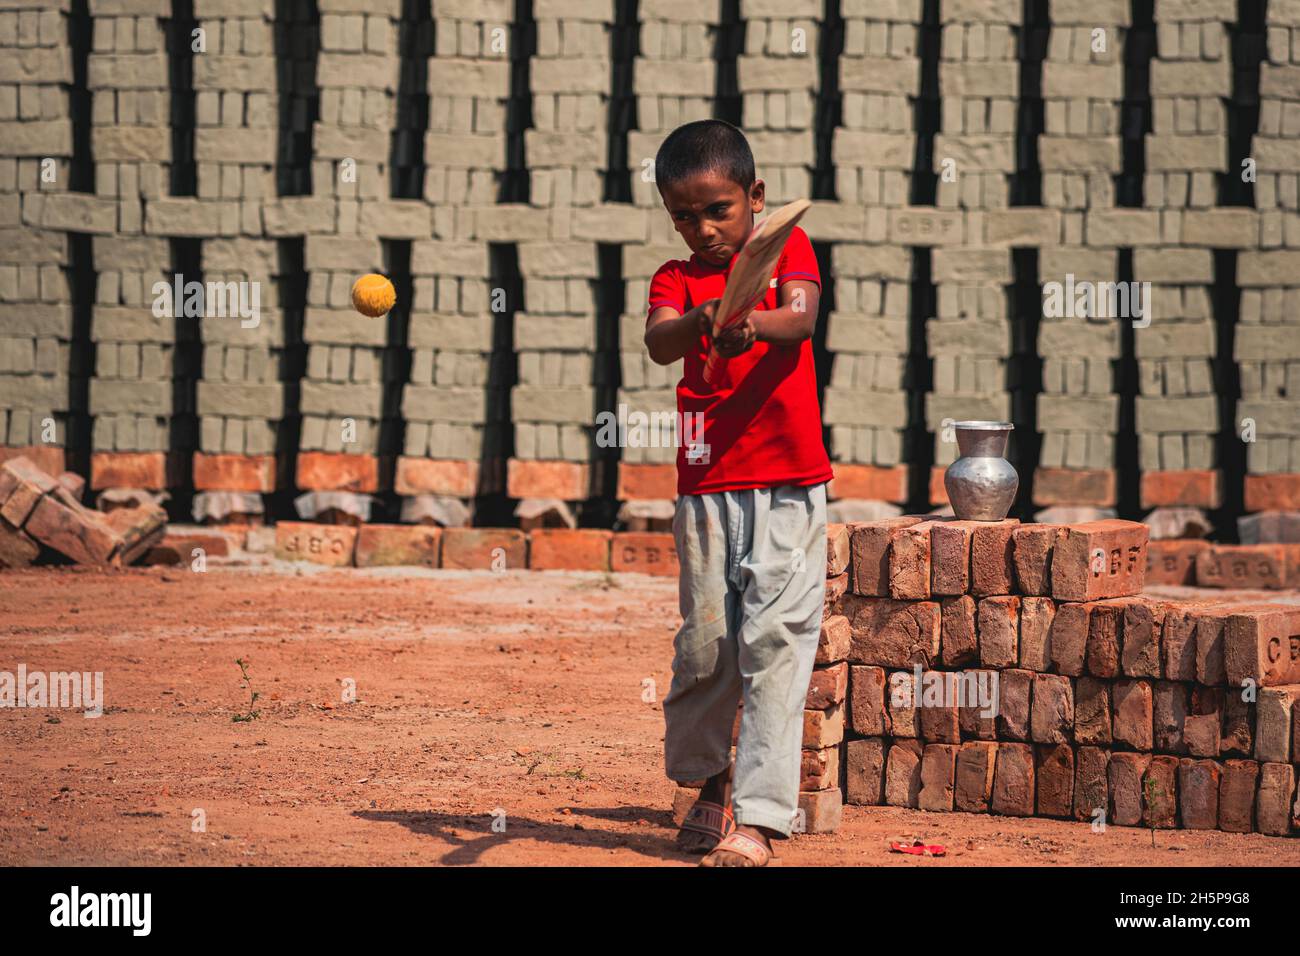 A boy playing cricket in the brickfield Stock Photo